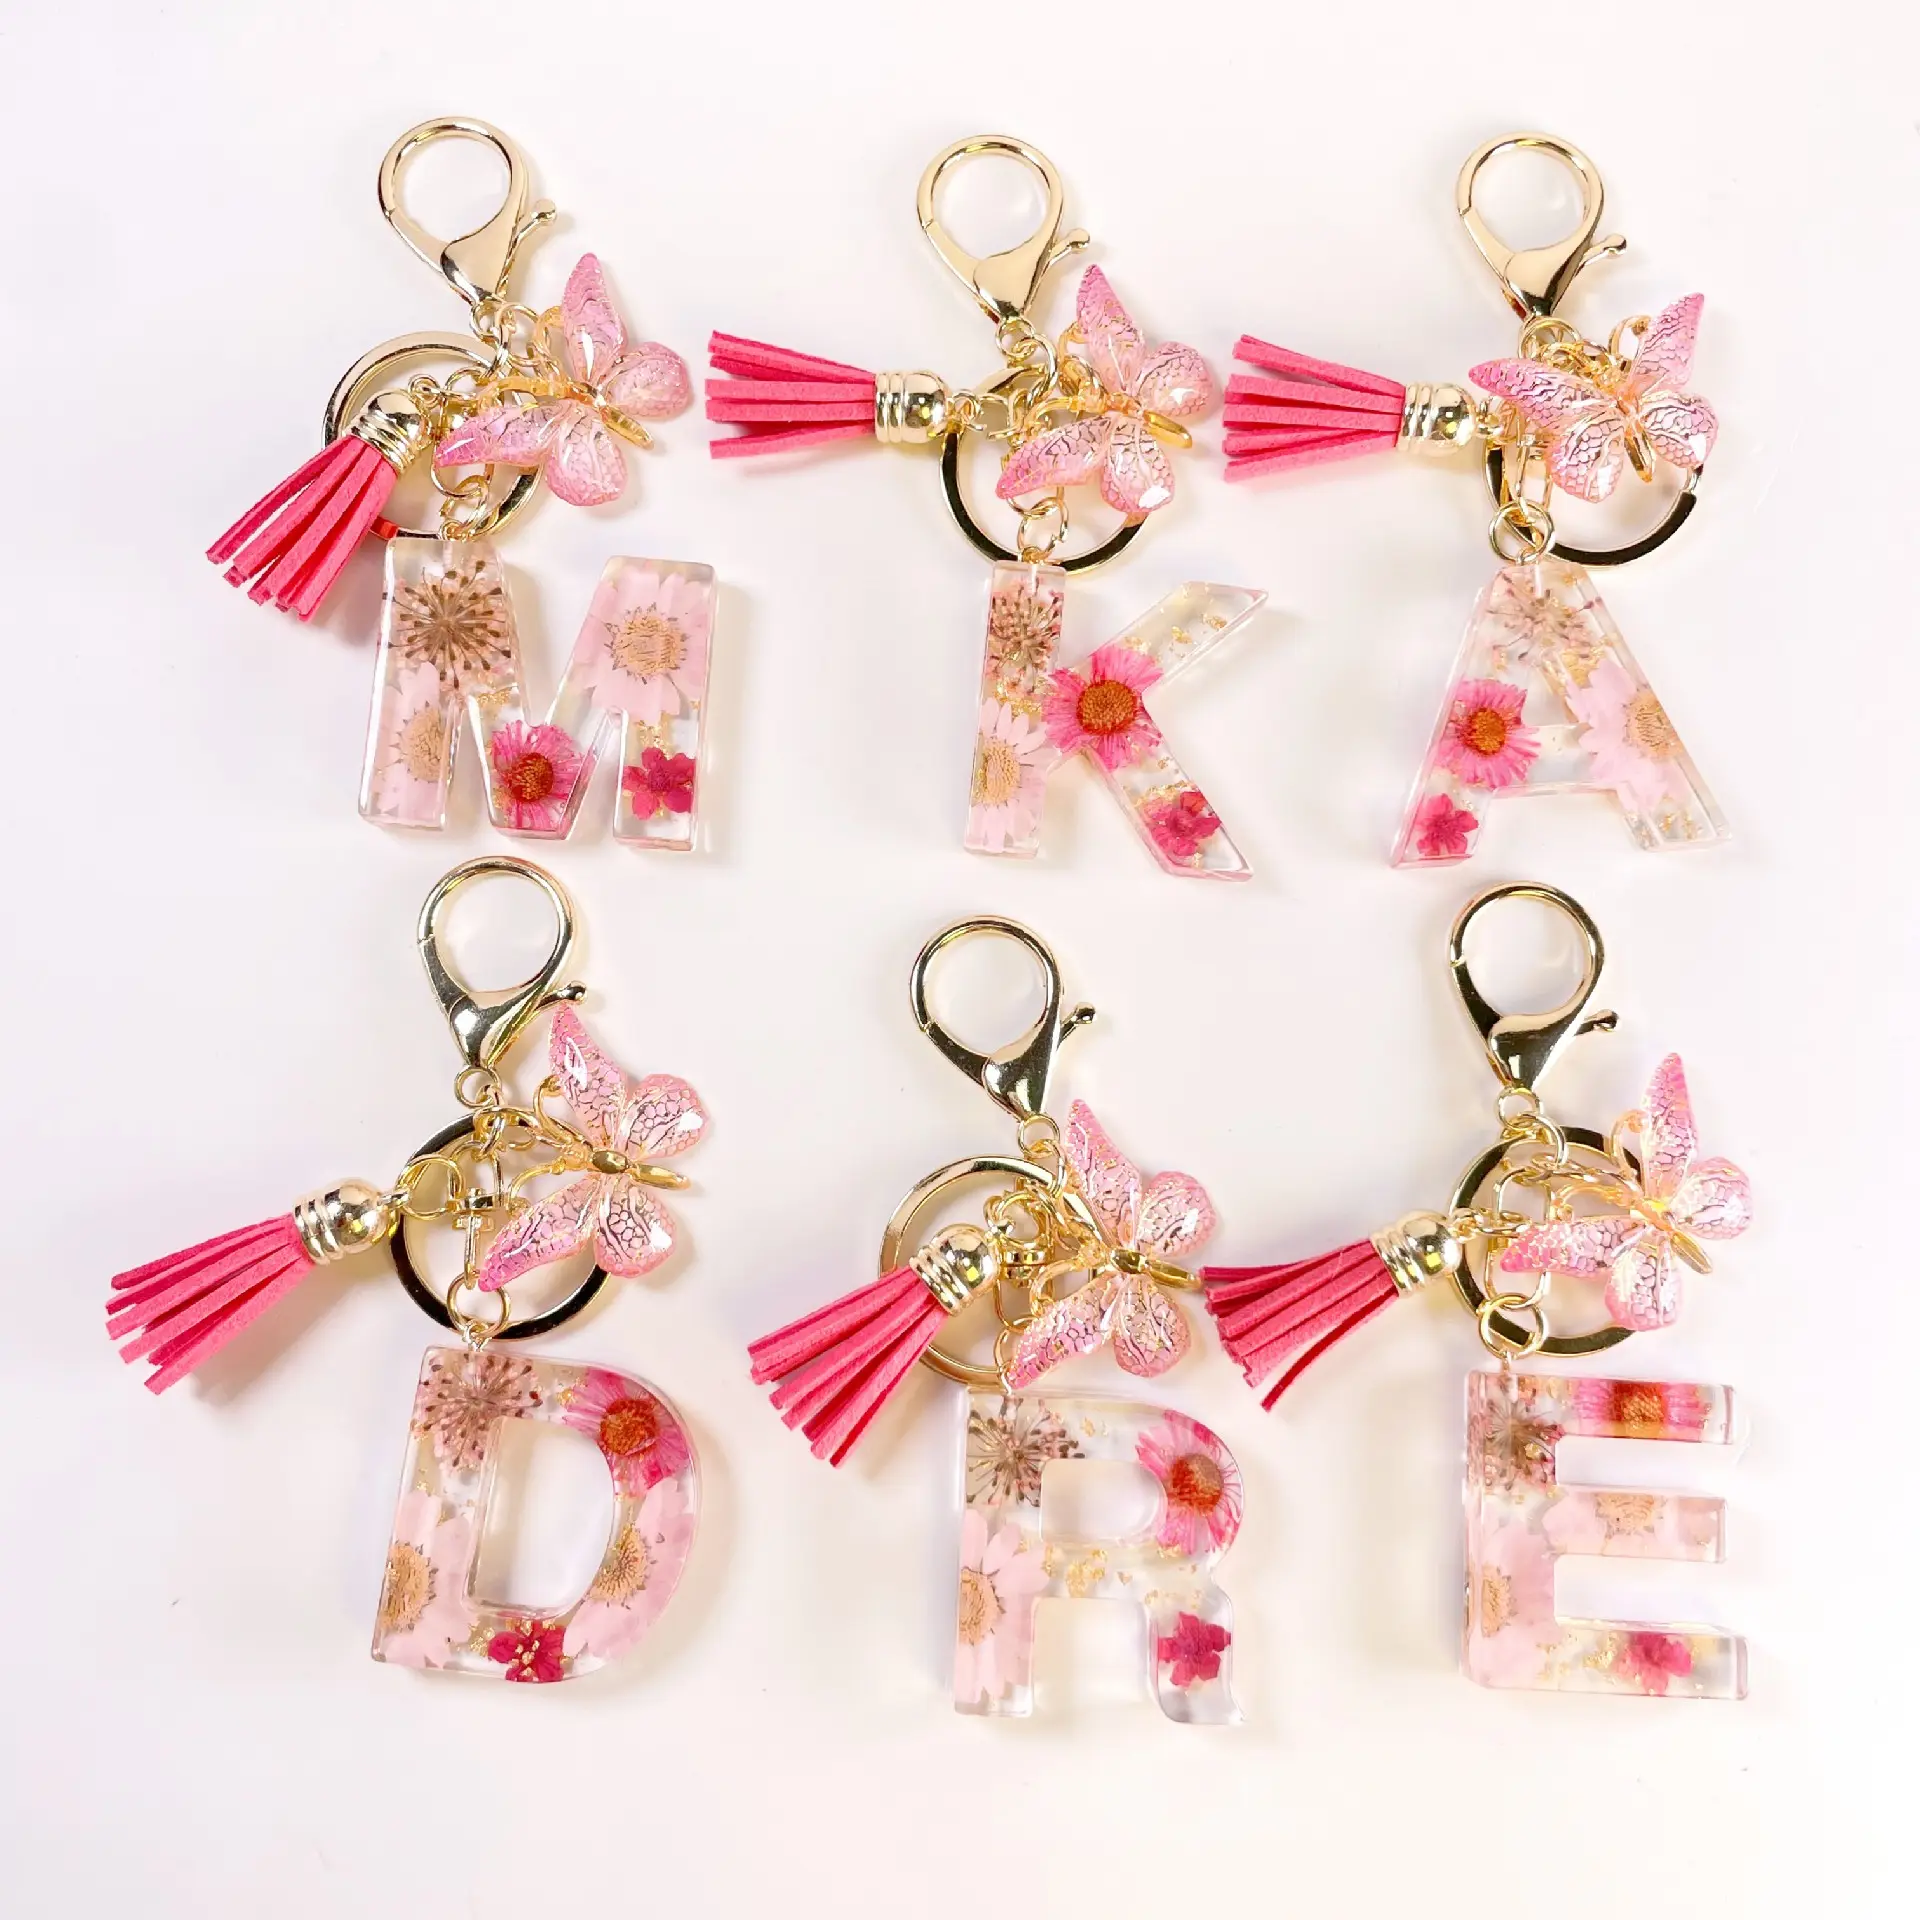 New Pink Dried Flower Letter Resin Butterfly Keychains Tassel Charm Key Chain For Gift